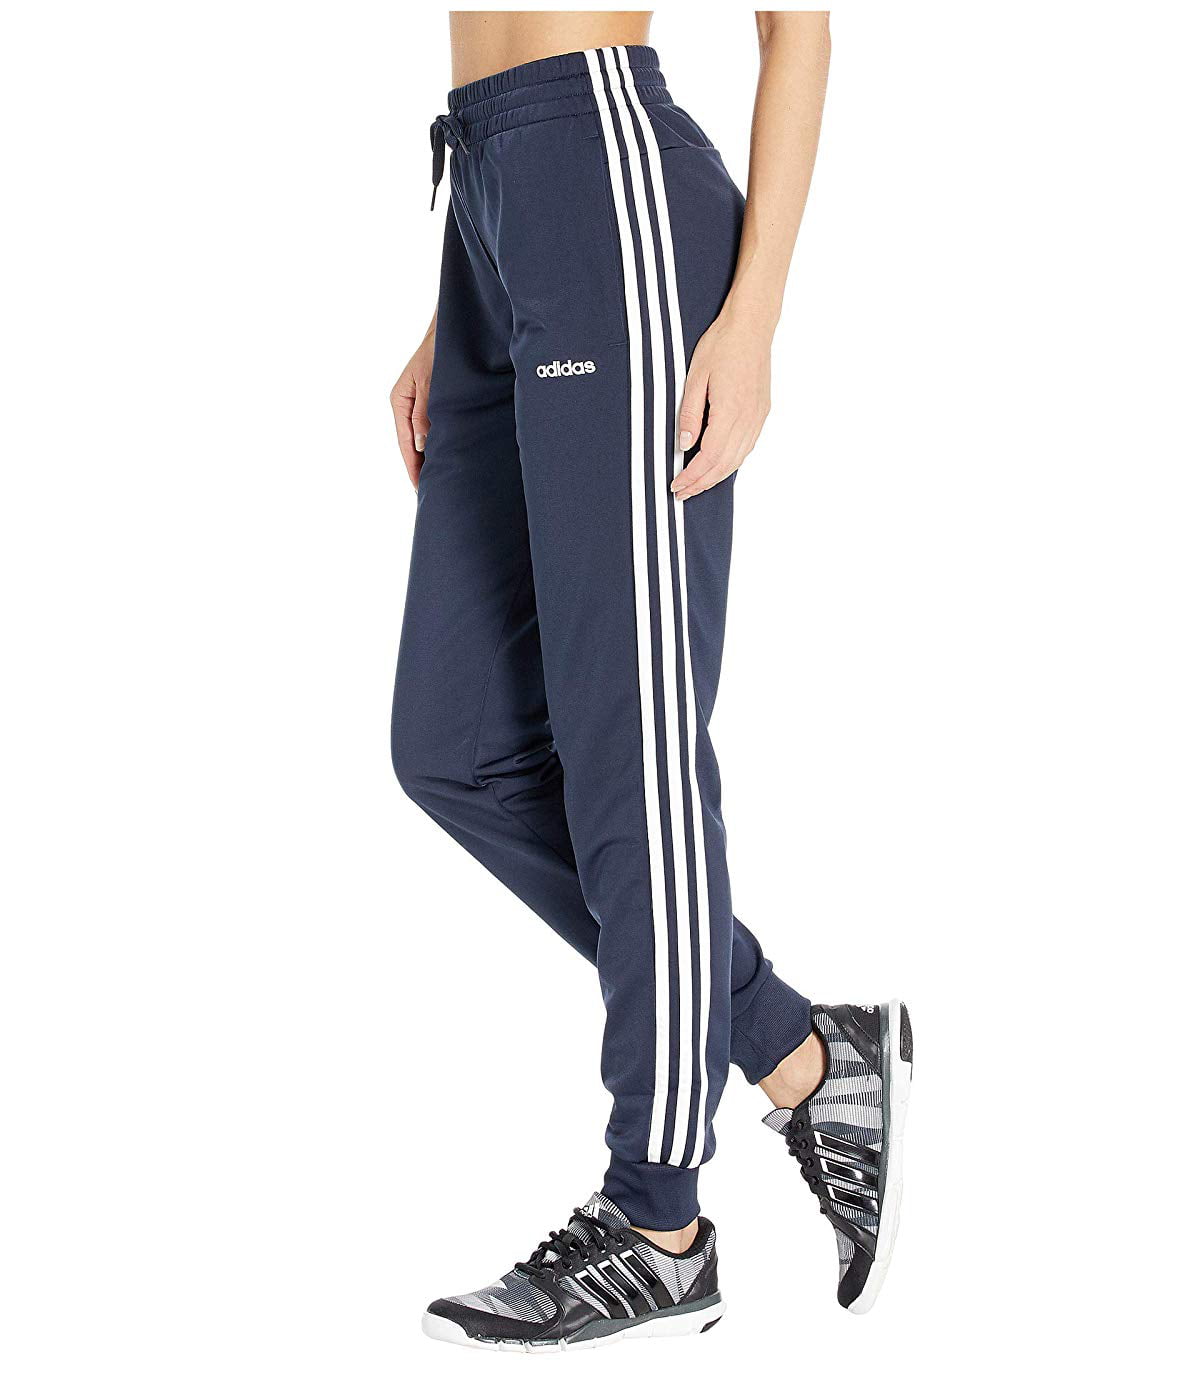 adidas 3 stripes joggers in legend ink